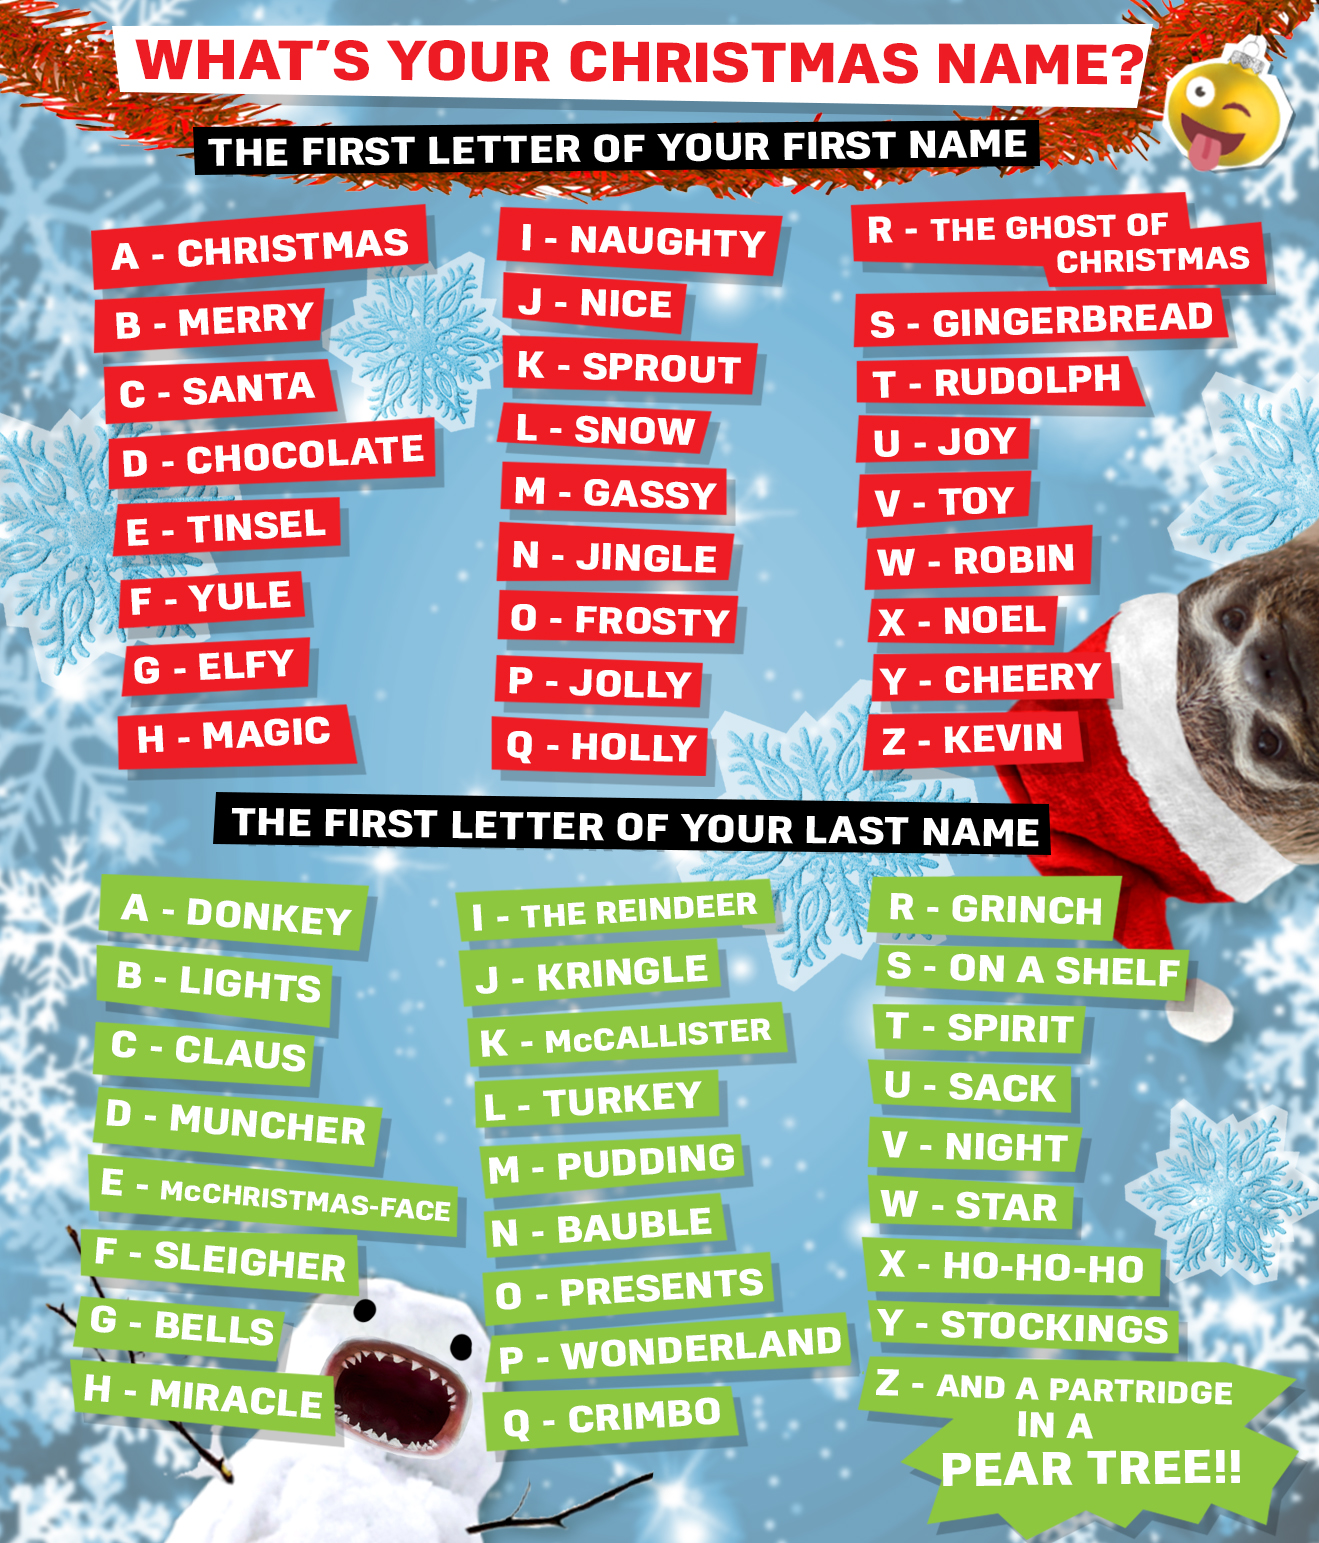 How to Make a Name Generator: What's Your Christmas Name? 